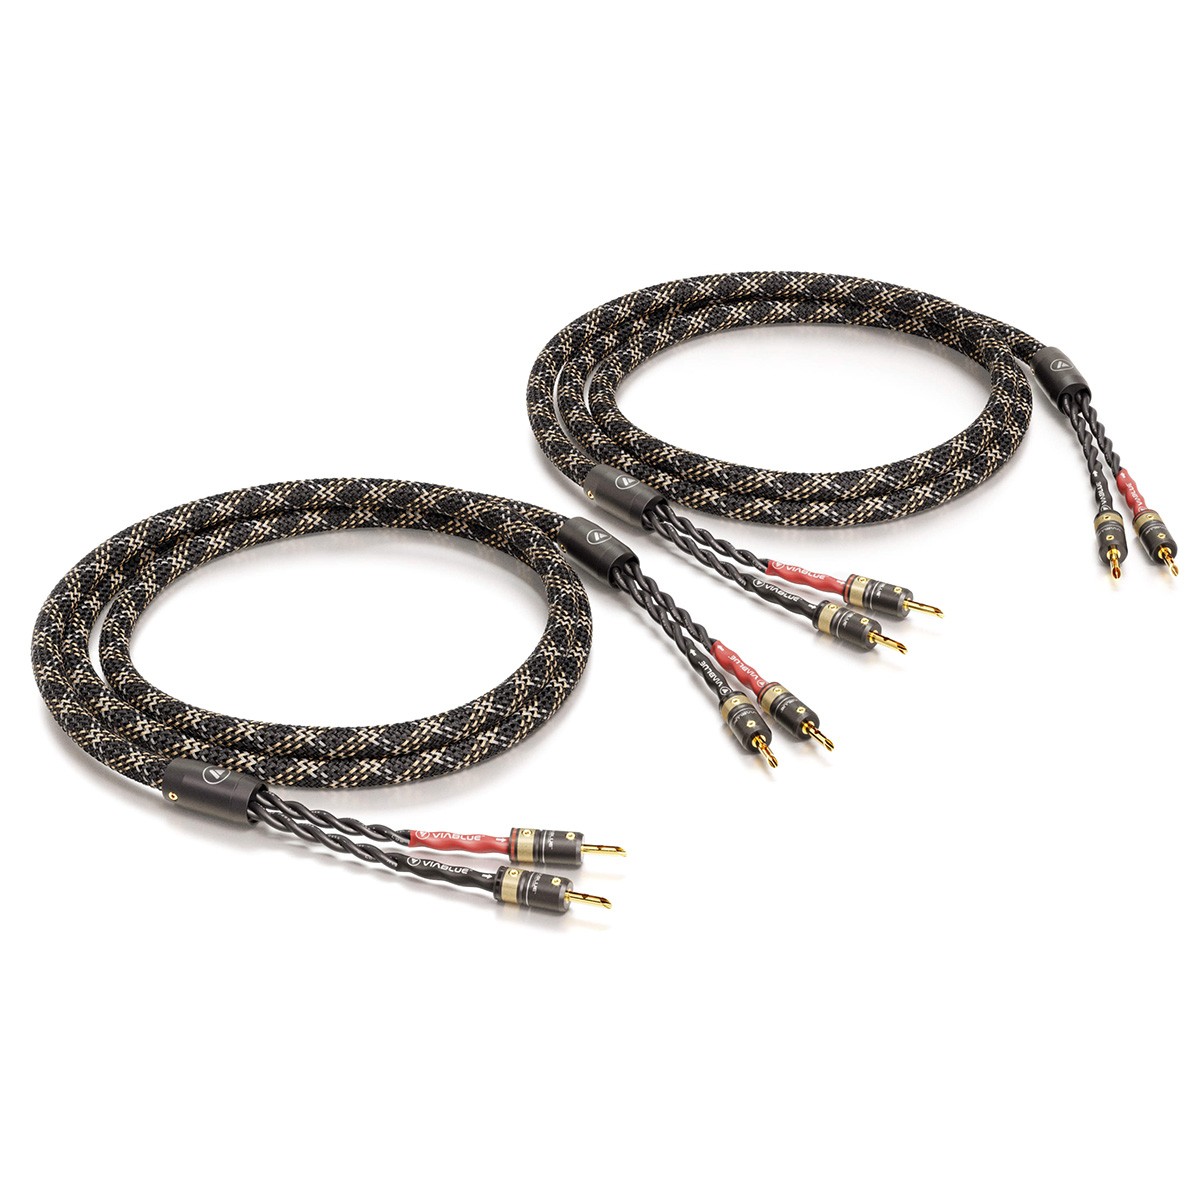 VIABLUE SC-4 Speaker Cables Silver Plated 15m (The Pair)